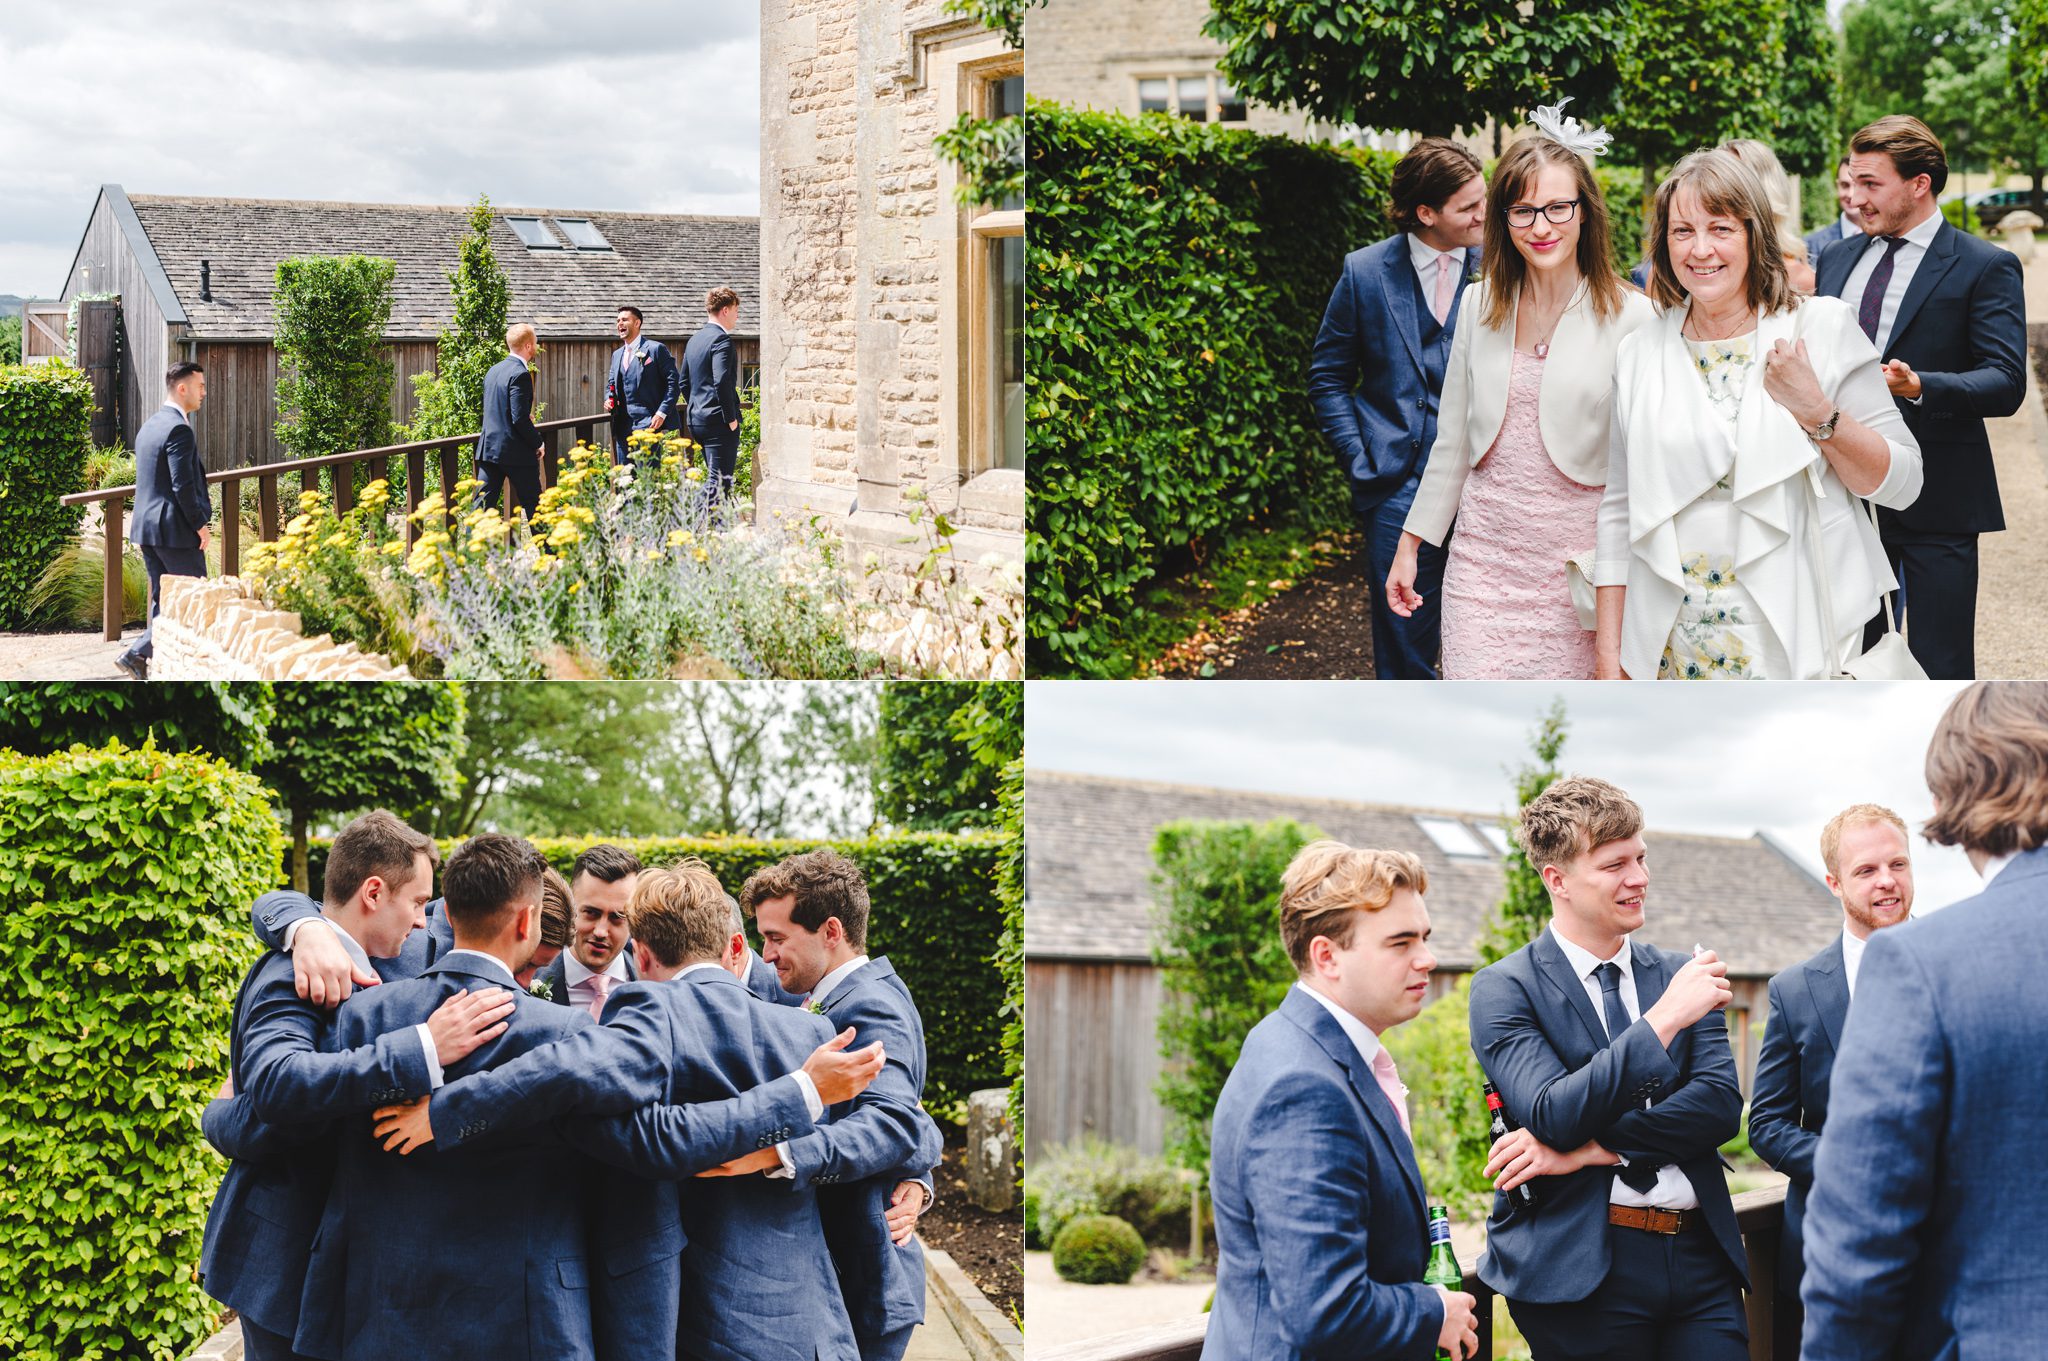 Wedding guests arriving at Hyde House in The Cotswolds